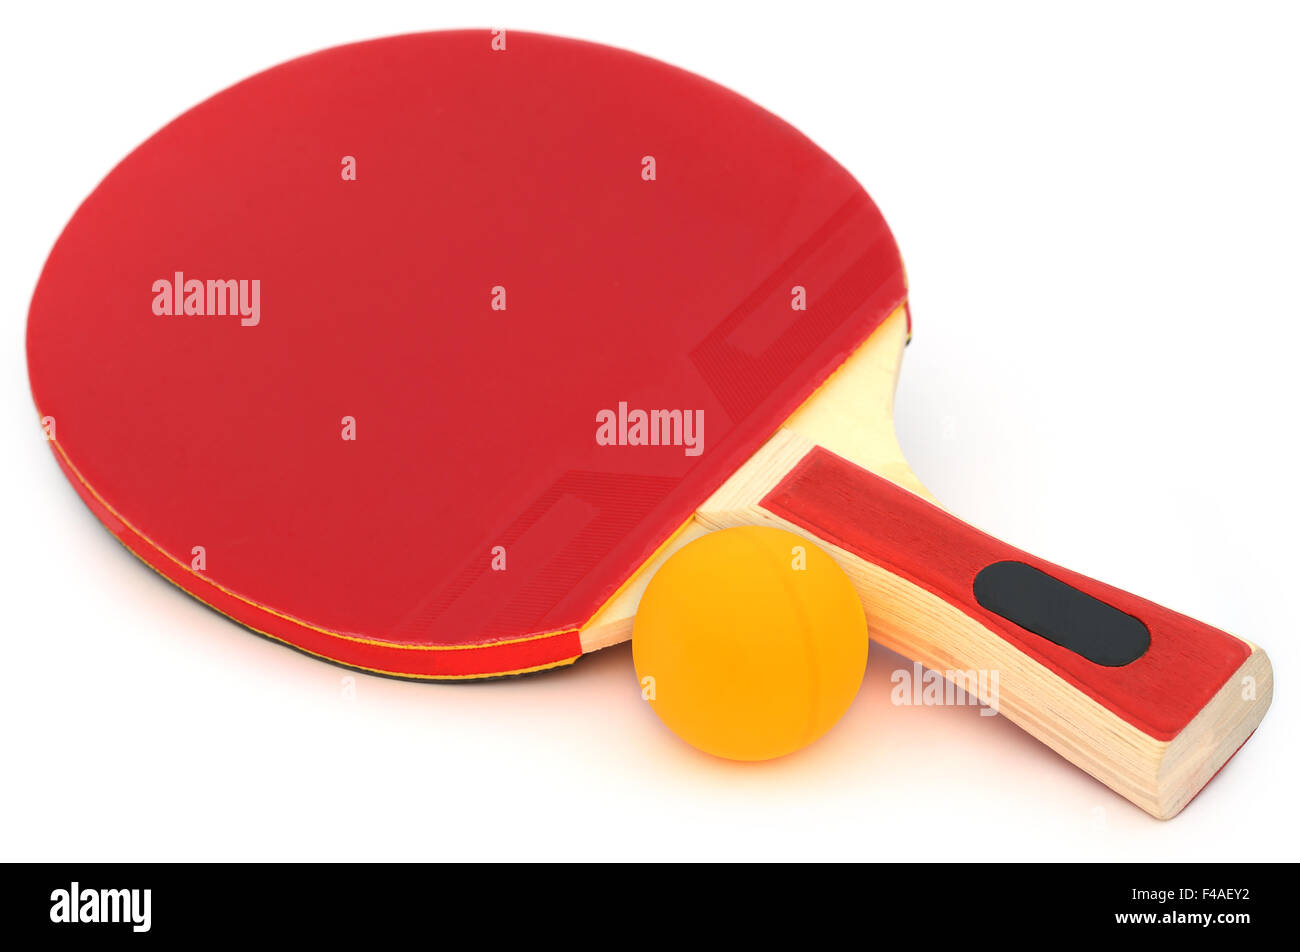 Tennis de table bat and ball over white background Banque D'Images